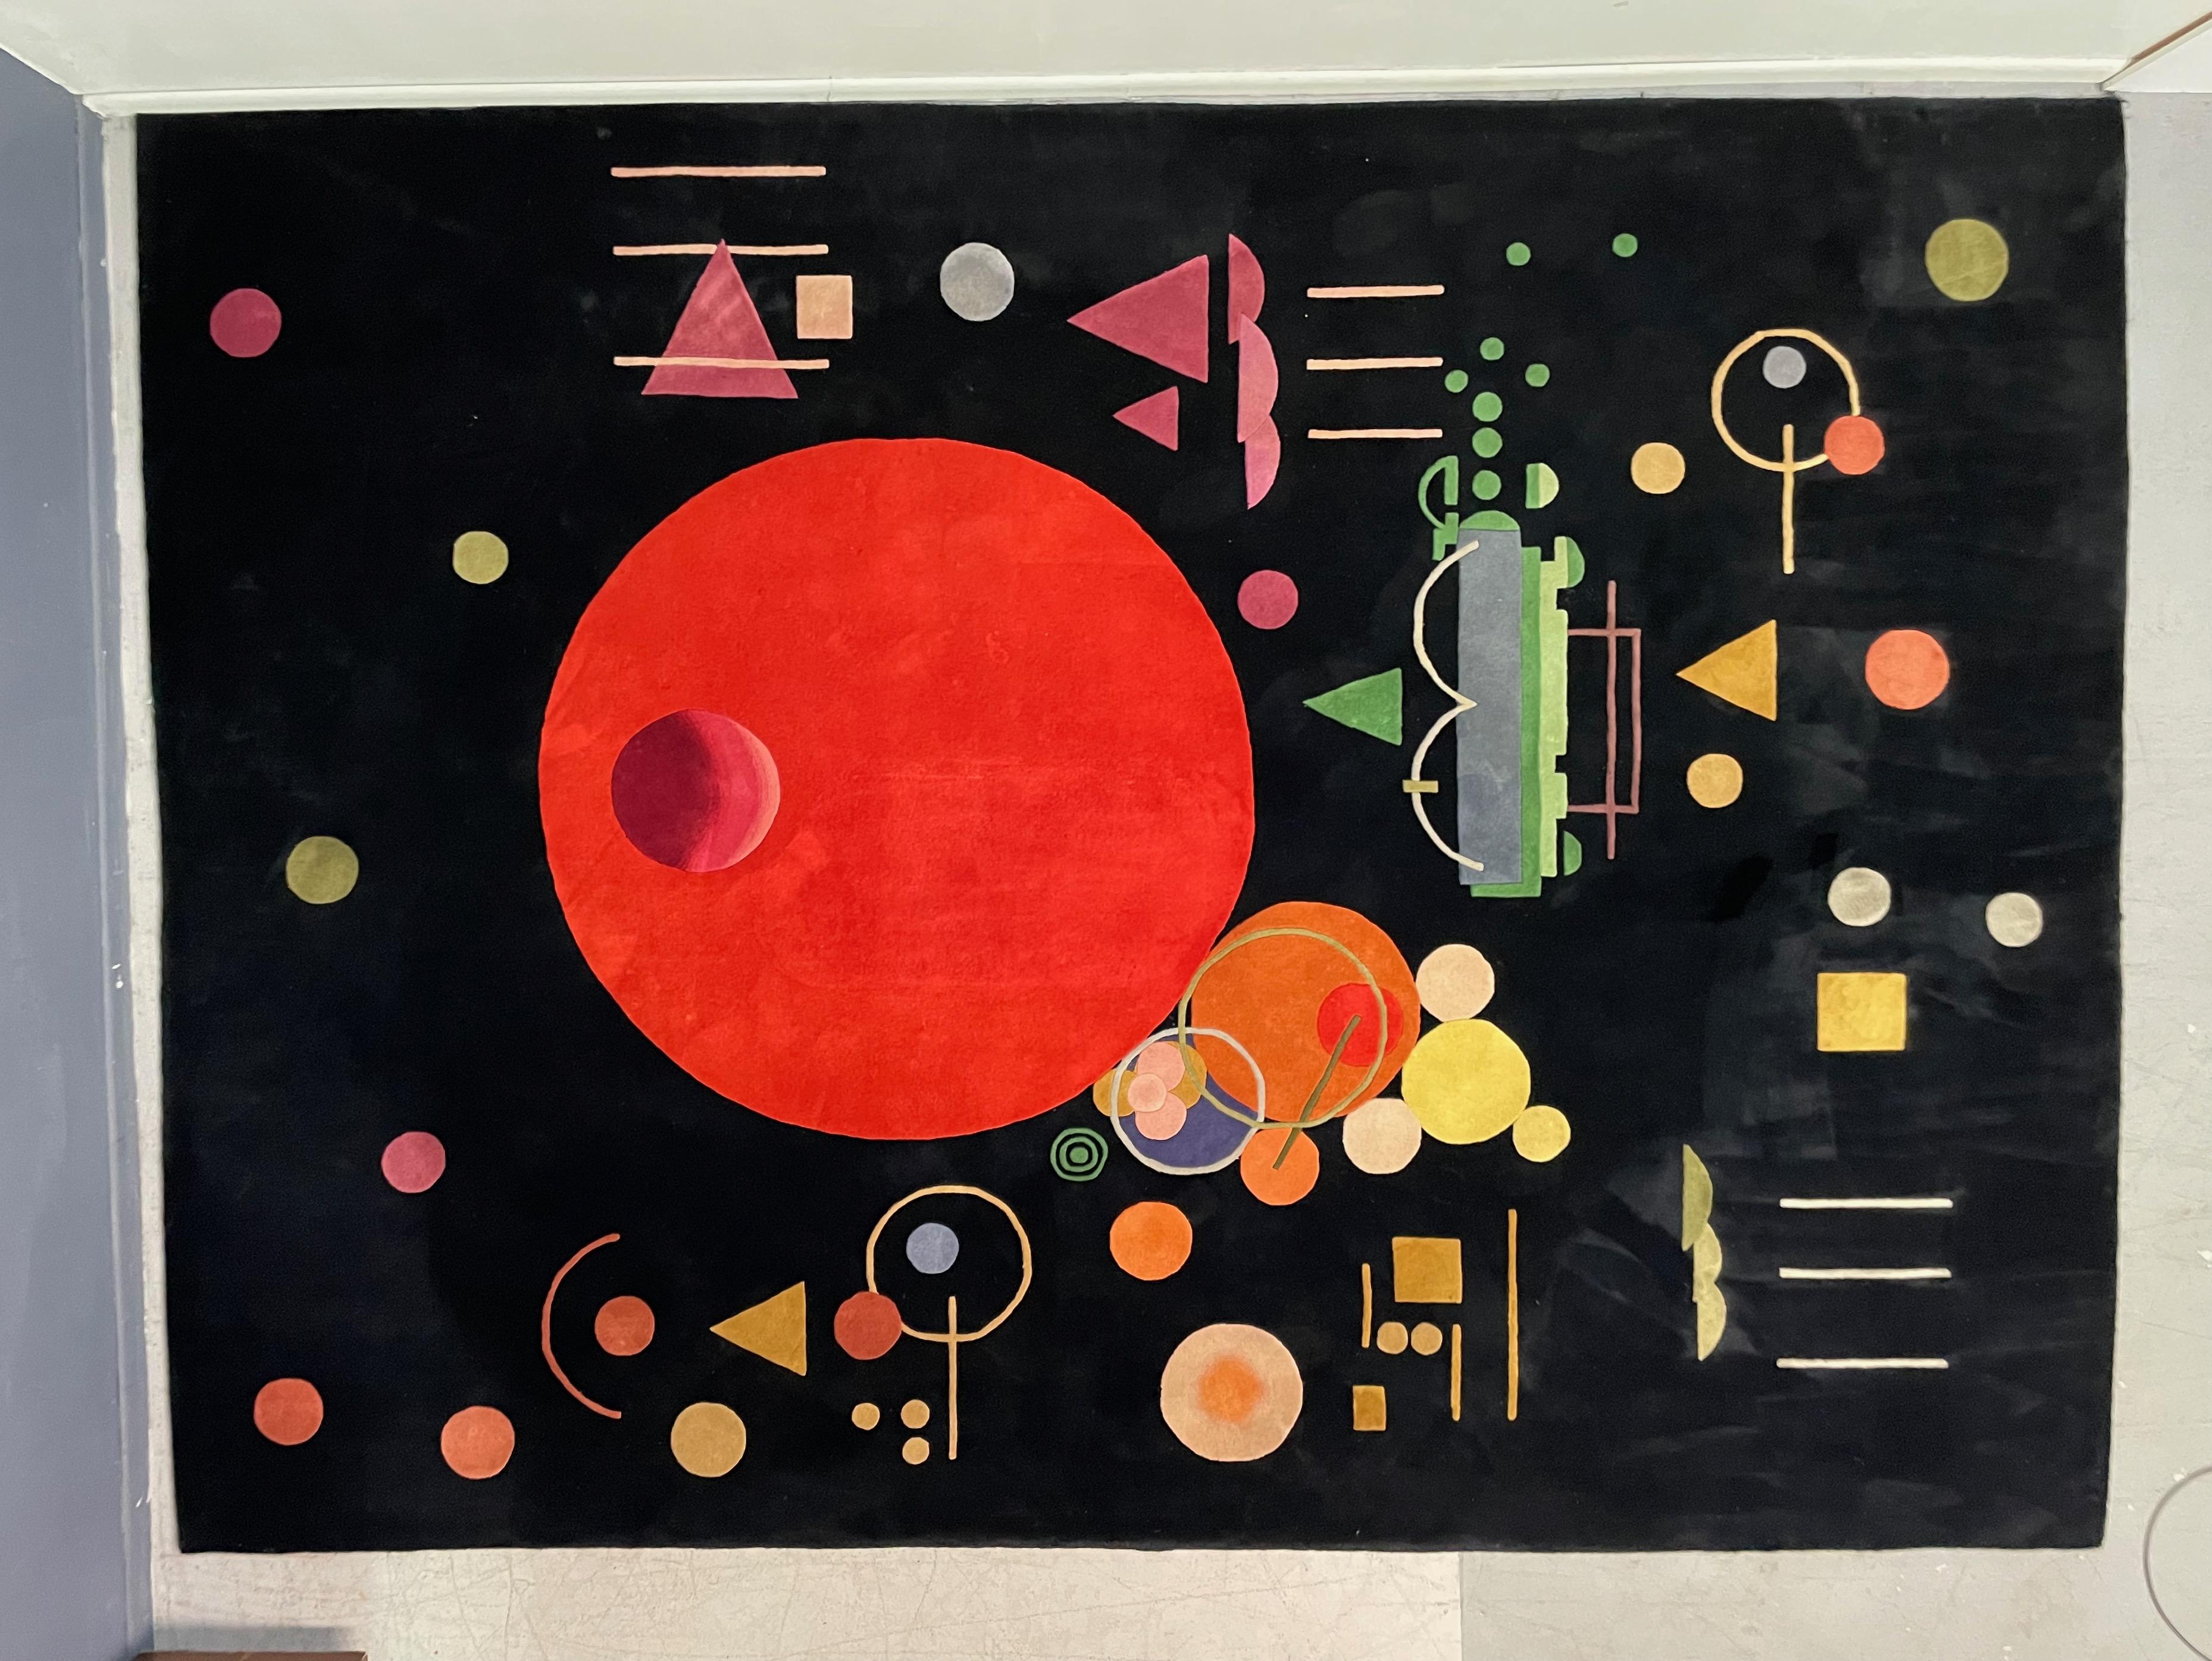 This is an all-wool modernist Bauhaus style area rug inspired by artist Wassily Kandinsky. Crafted in Denmark circa 1988 as part of the 20th Century Collection by Ege Axminster Art Line. An attractive decorative art work as either an area rug or a